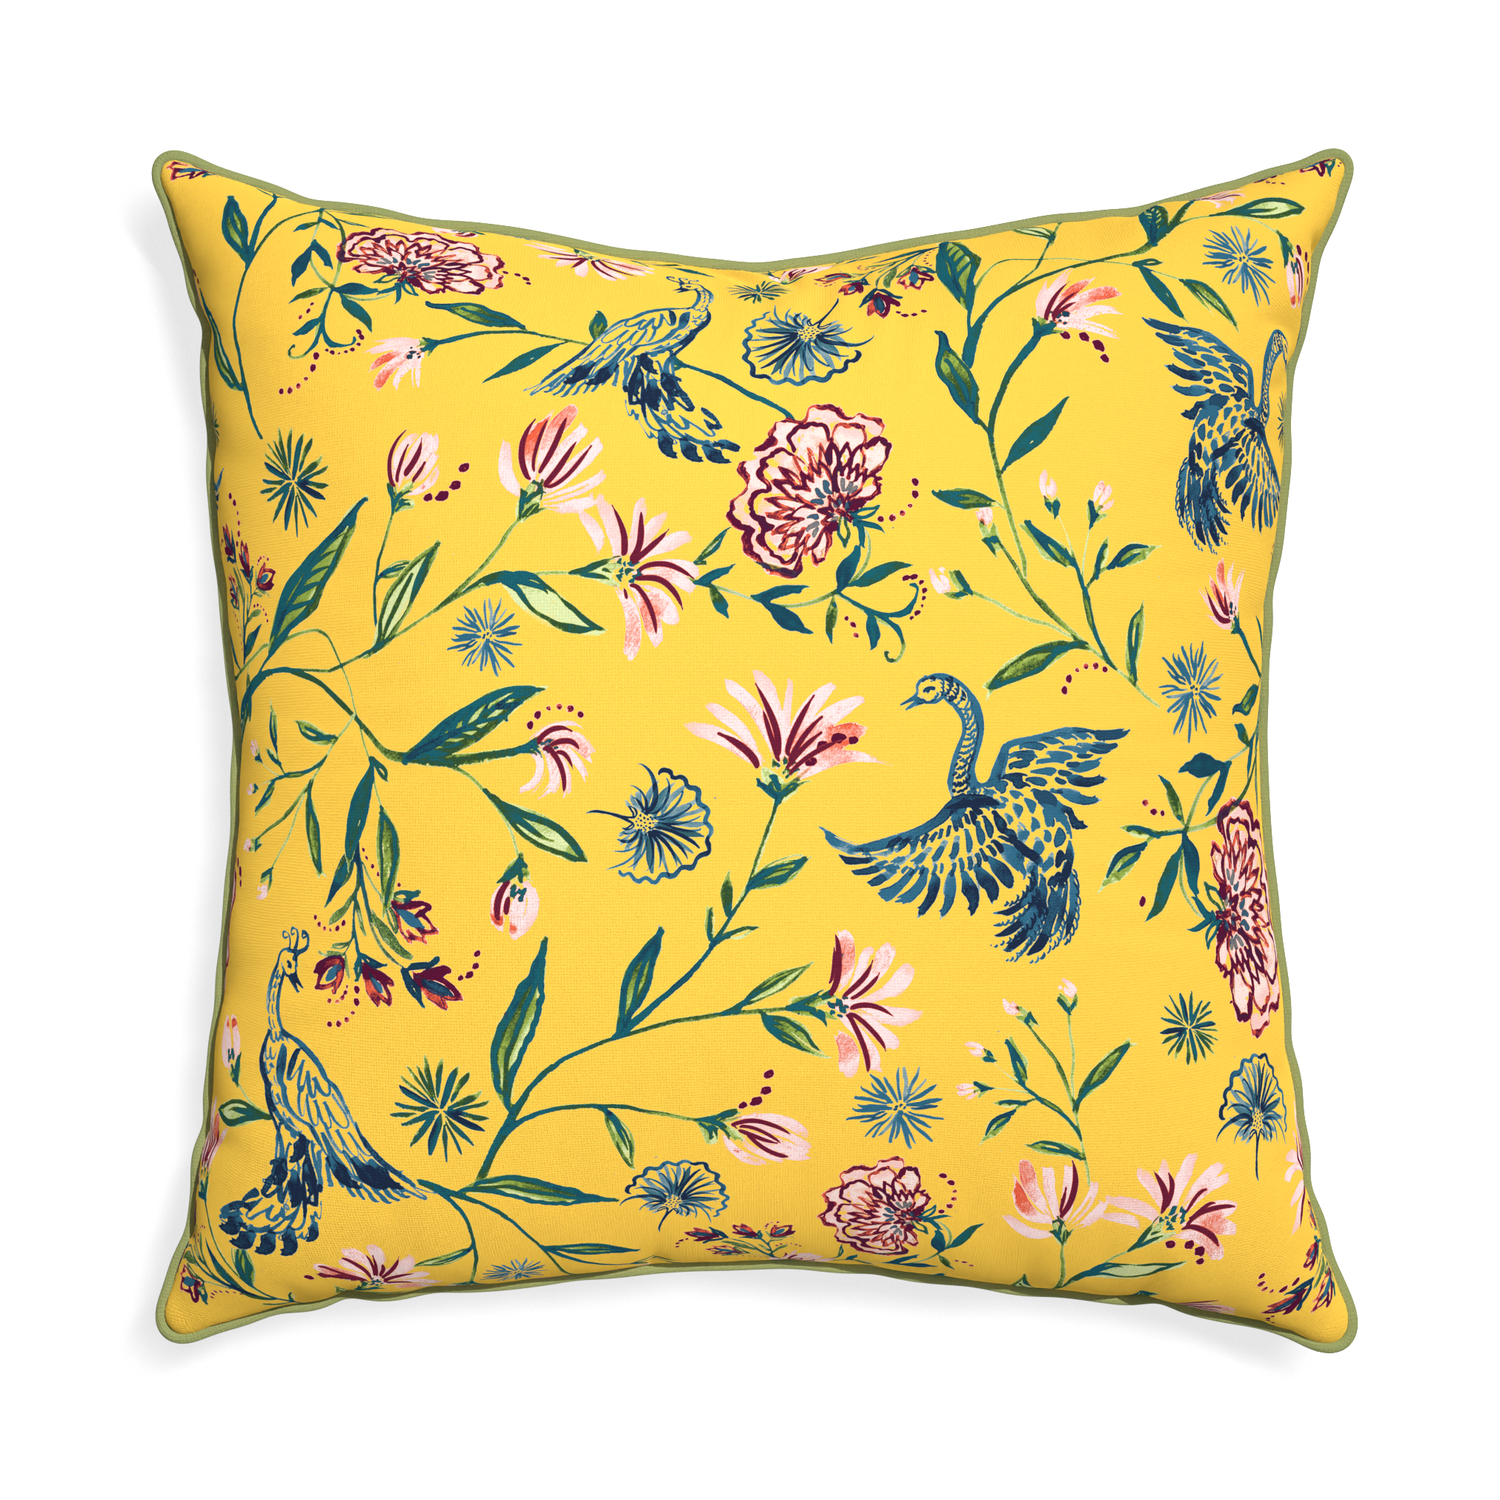 Euro-sham daphne canary custom pillow with moss piping on white background